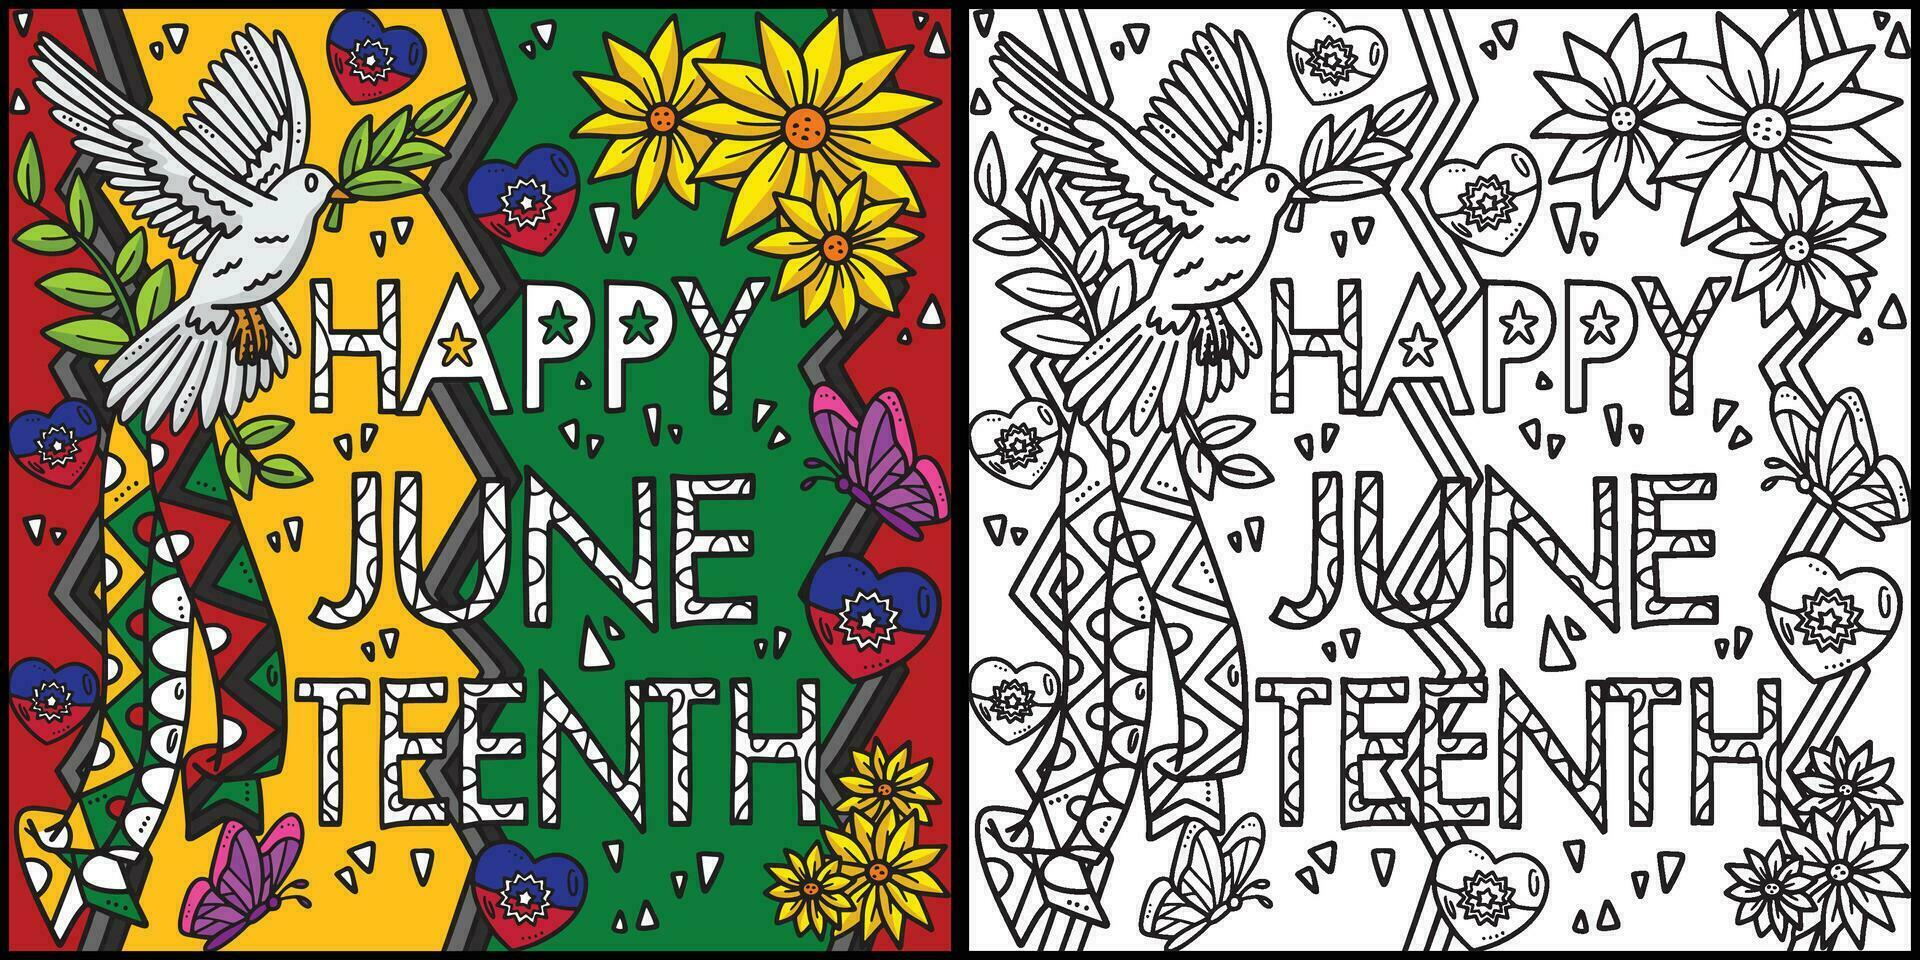 Happy Juneteenth Banner Coloring Page Illustration vector